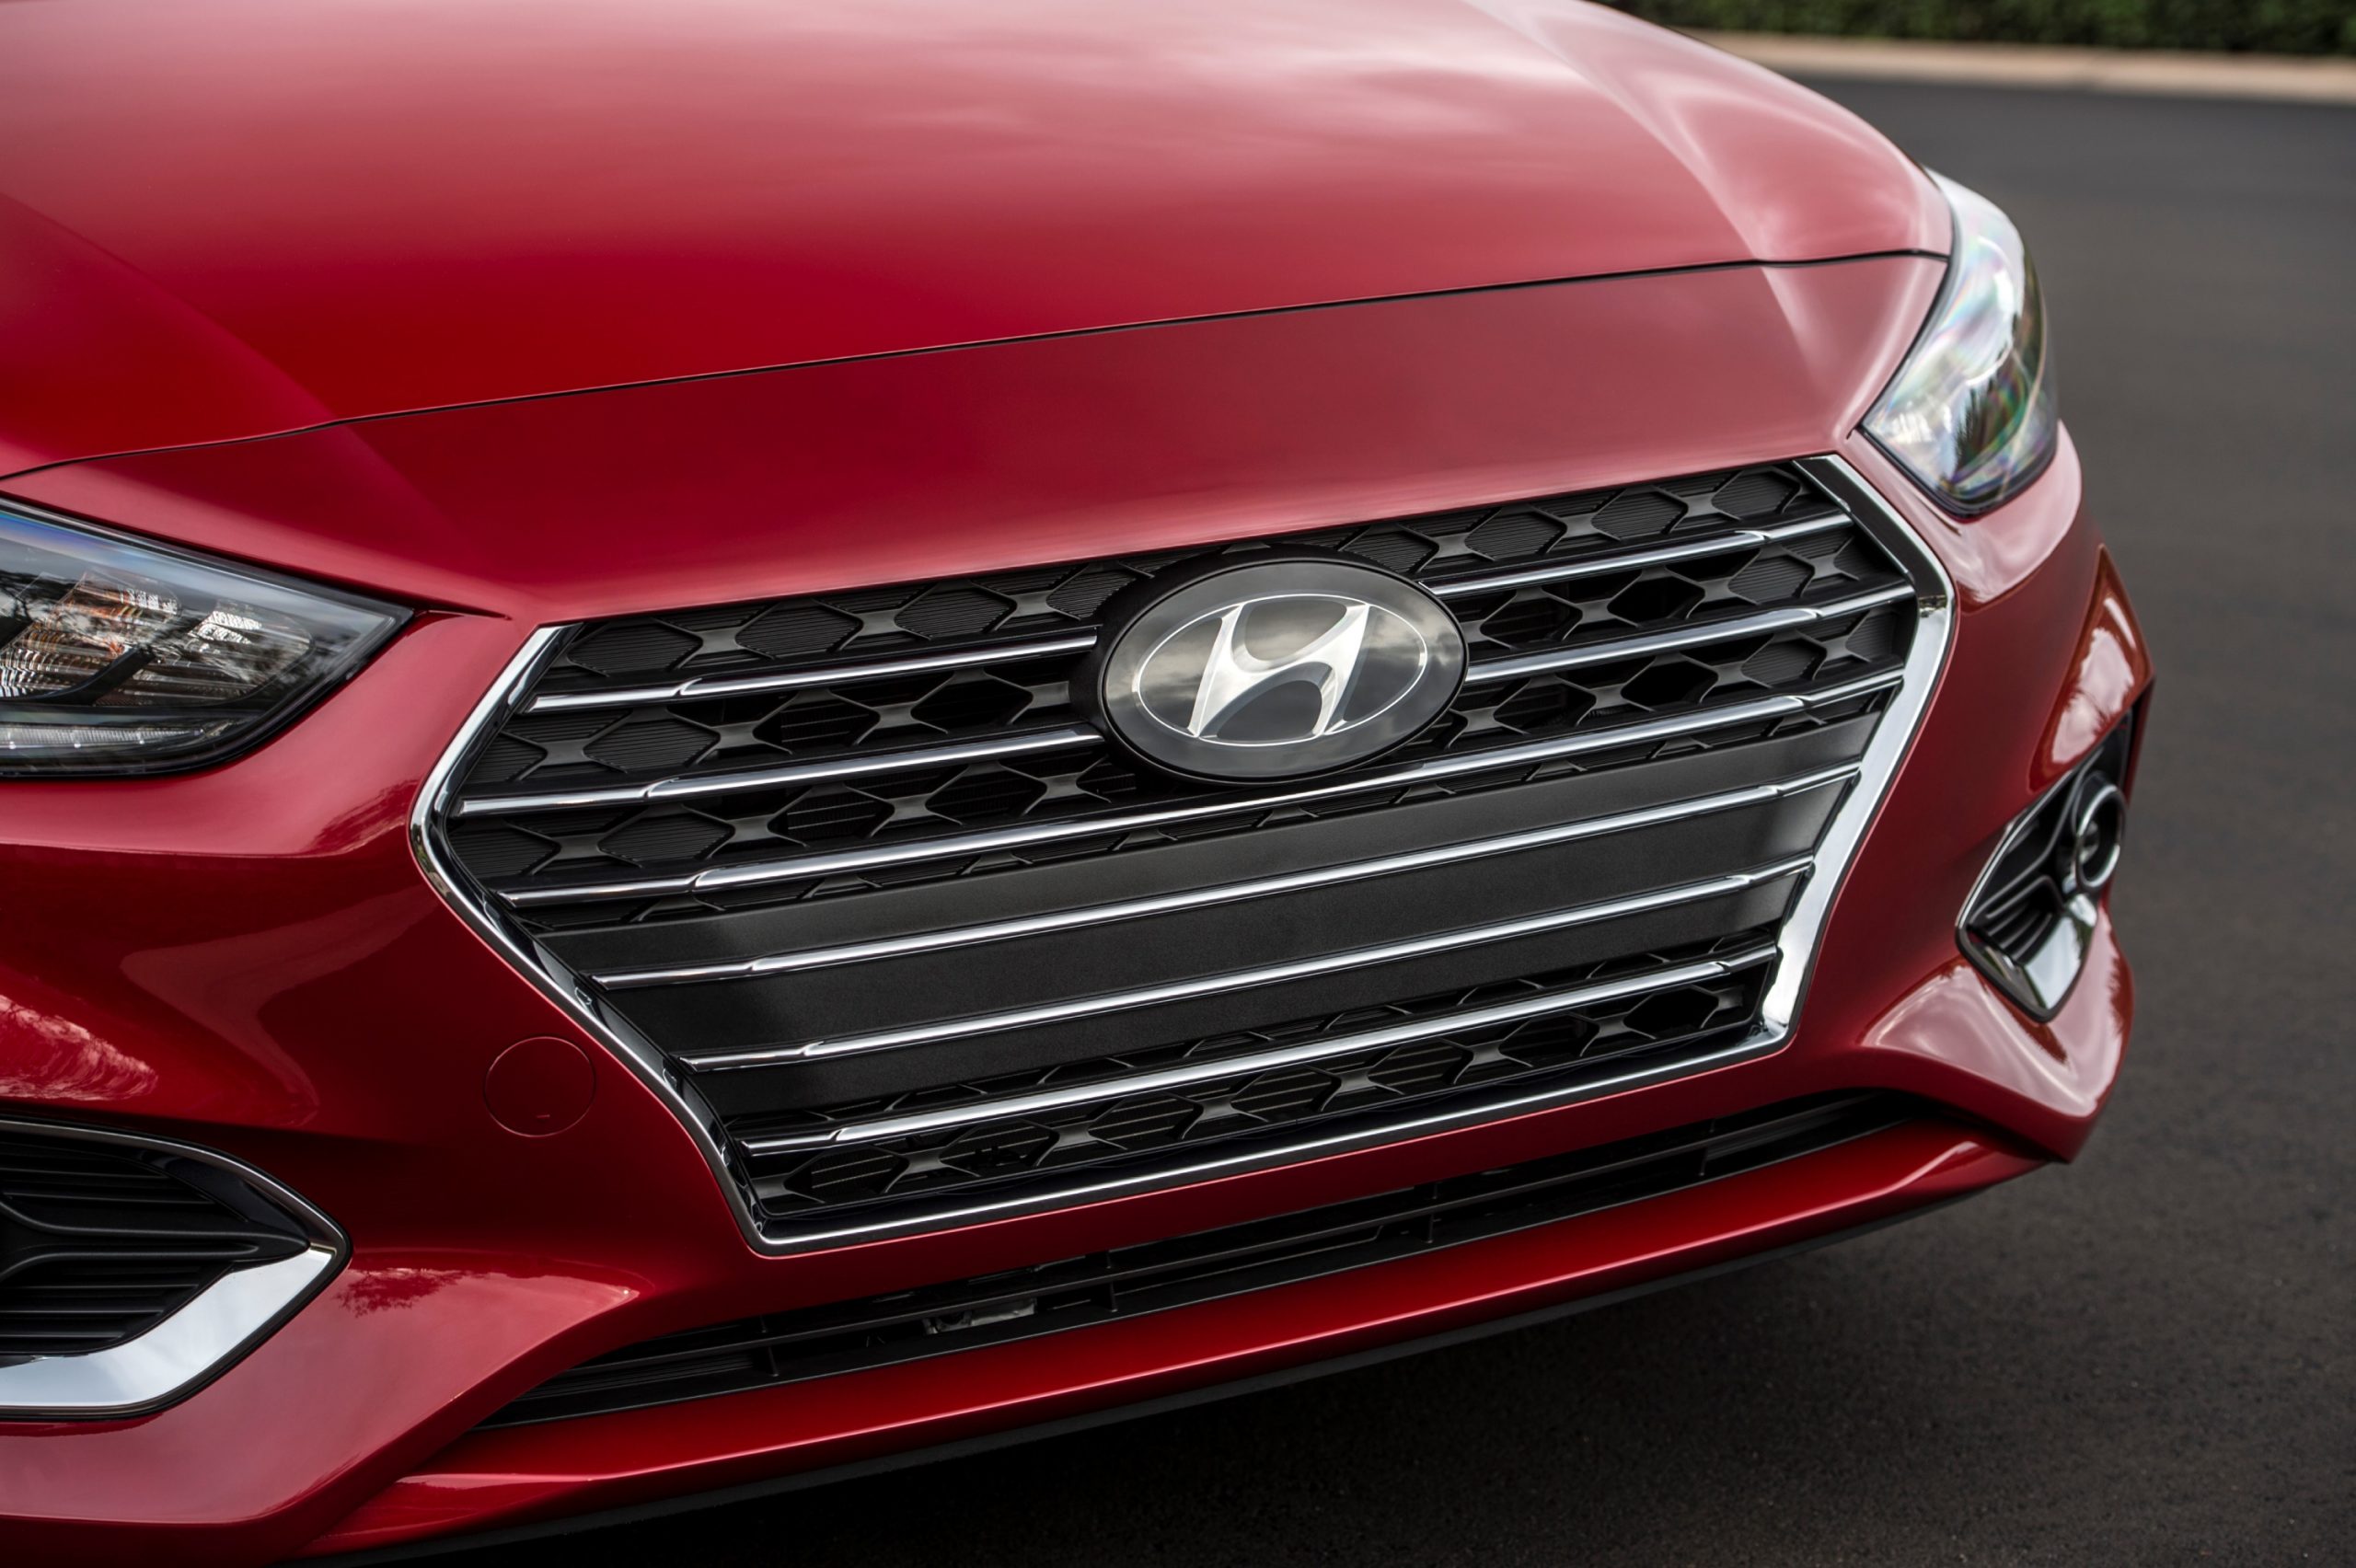 A close-up of the Hyundai logo on the grille of a red 2021 Accent subcompact car